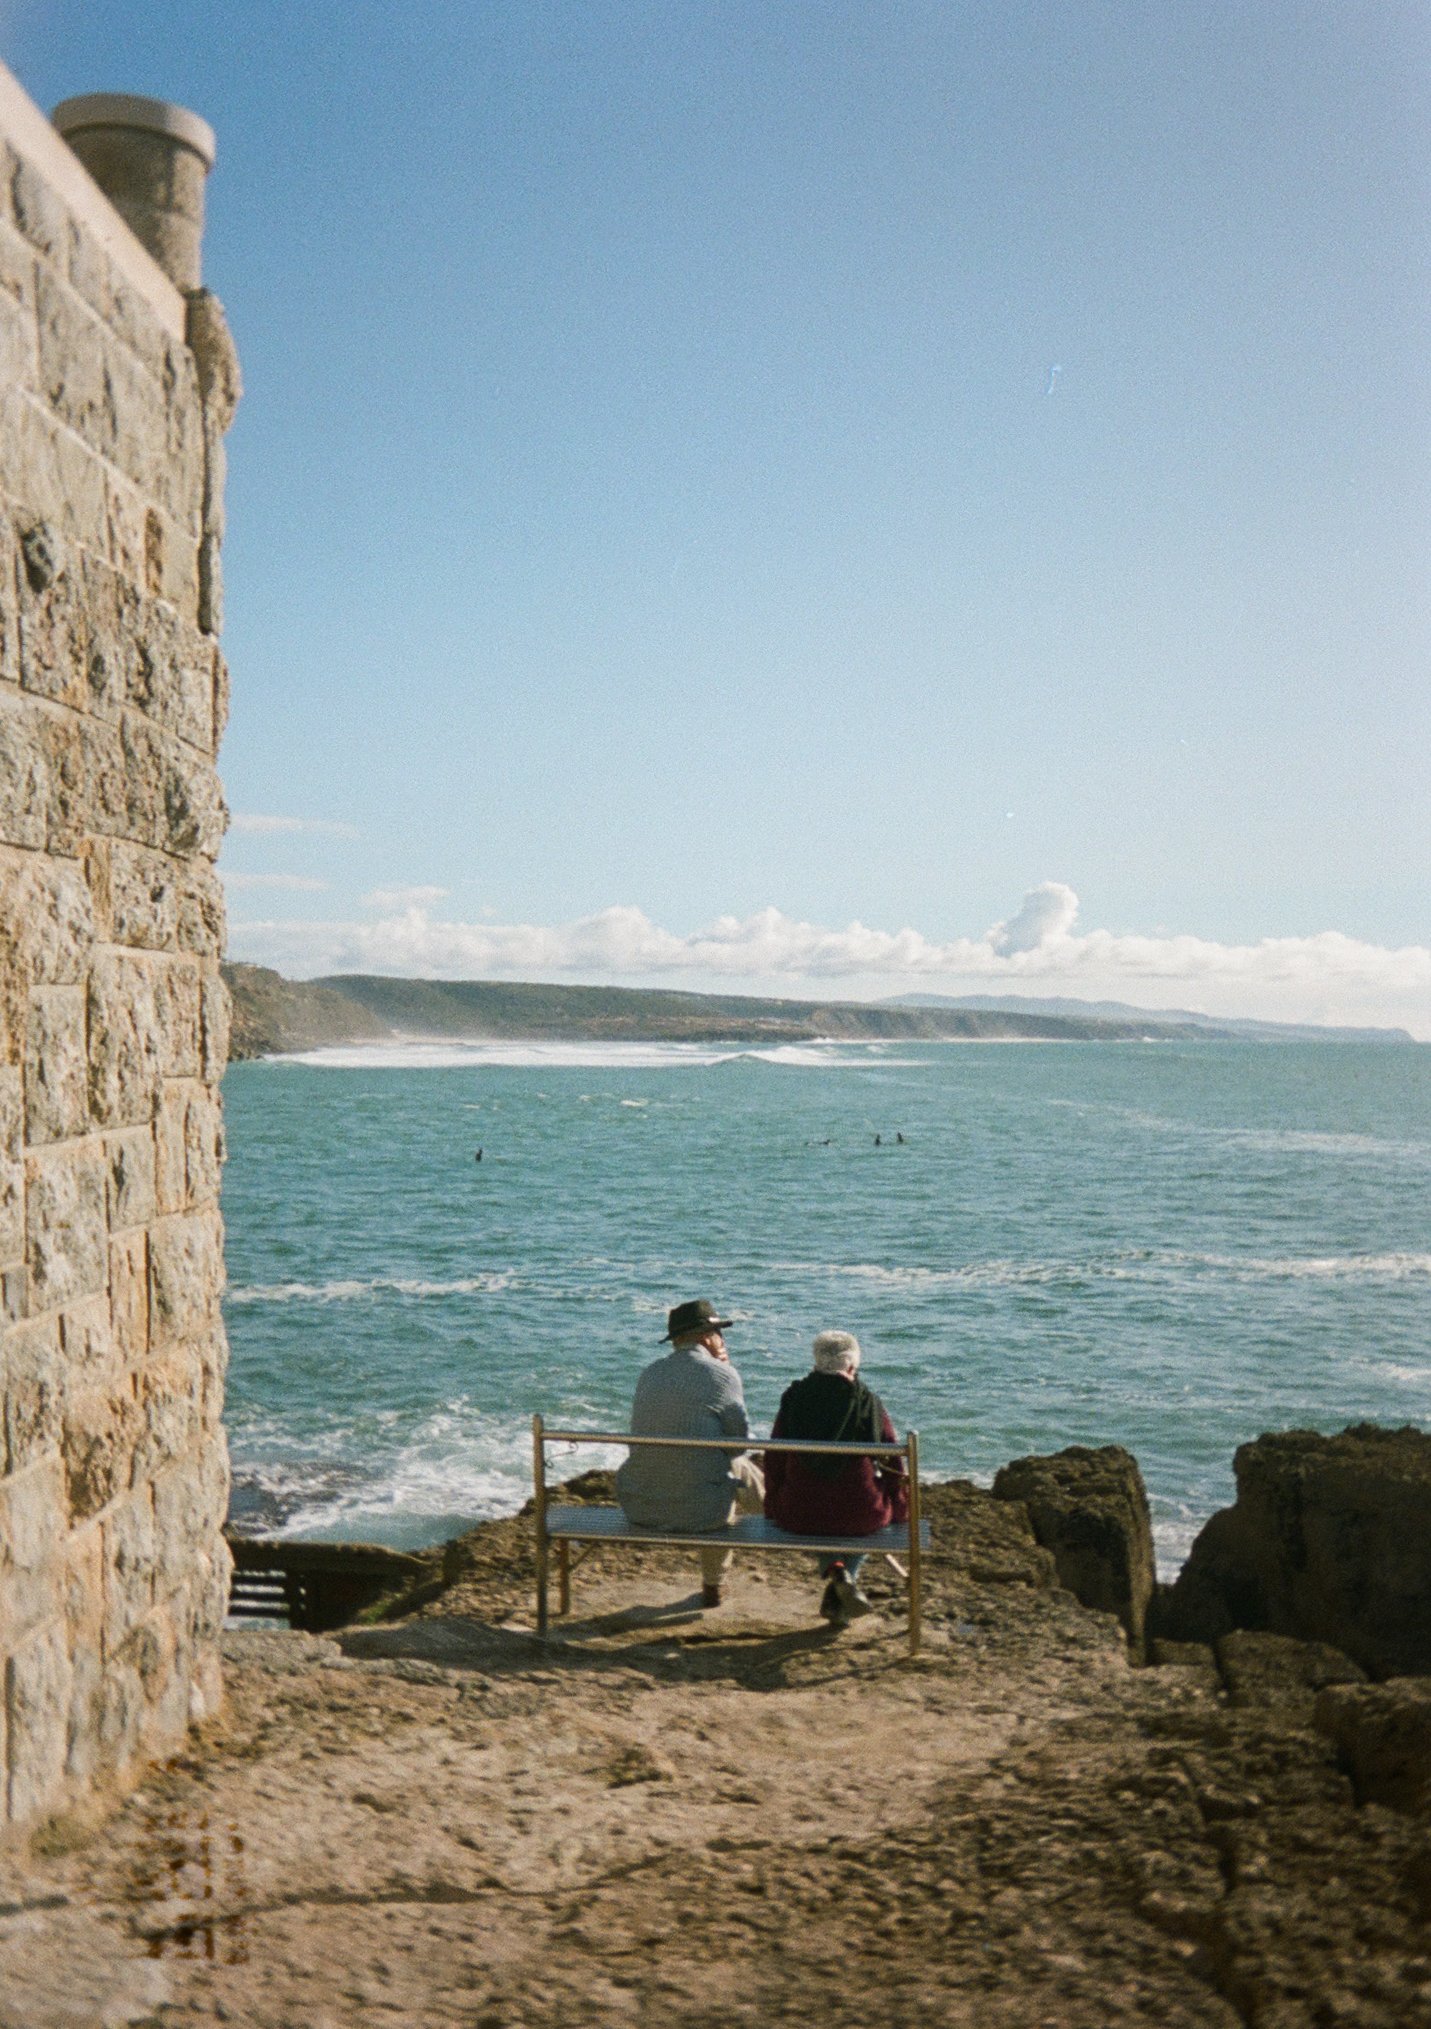  Looking out to sea in Ericeira, Portugal.  